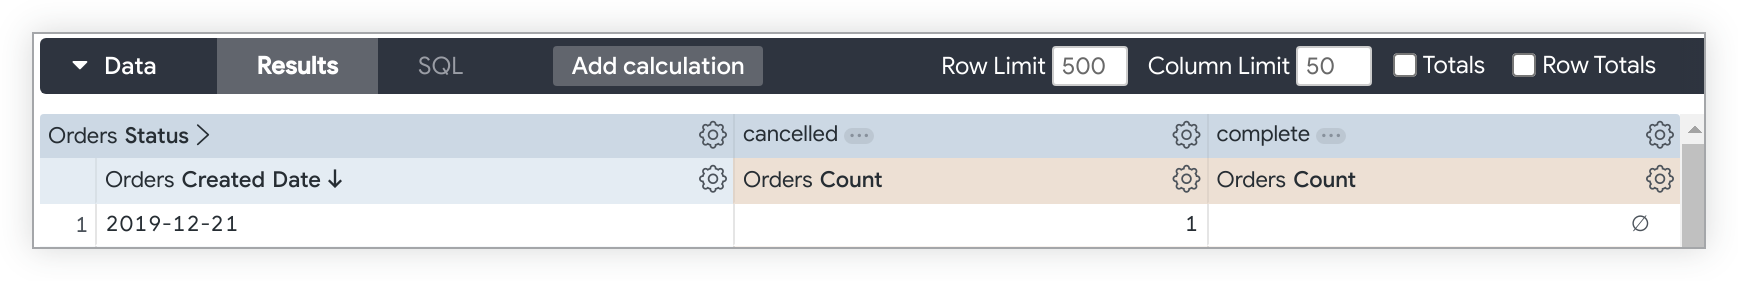 Explore query with Orders Created Date and Orders Count pivoted by the Orders Status field values 'cancelled' and 'complete'.